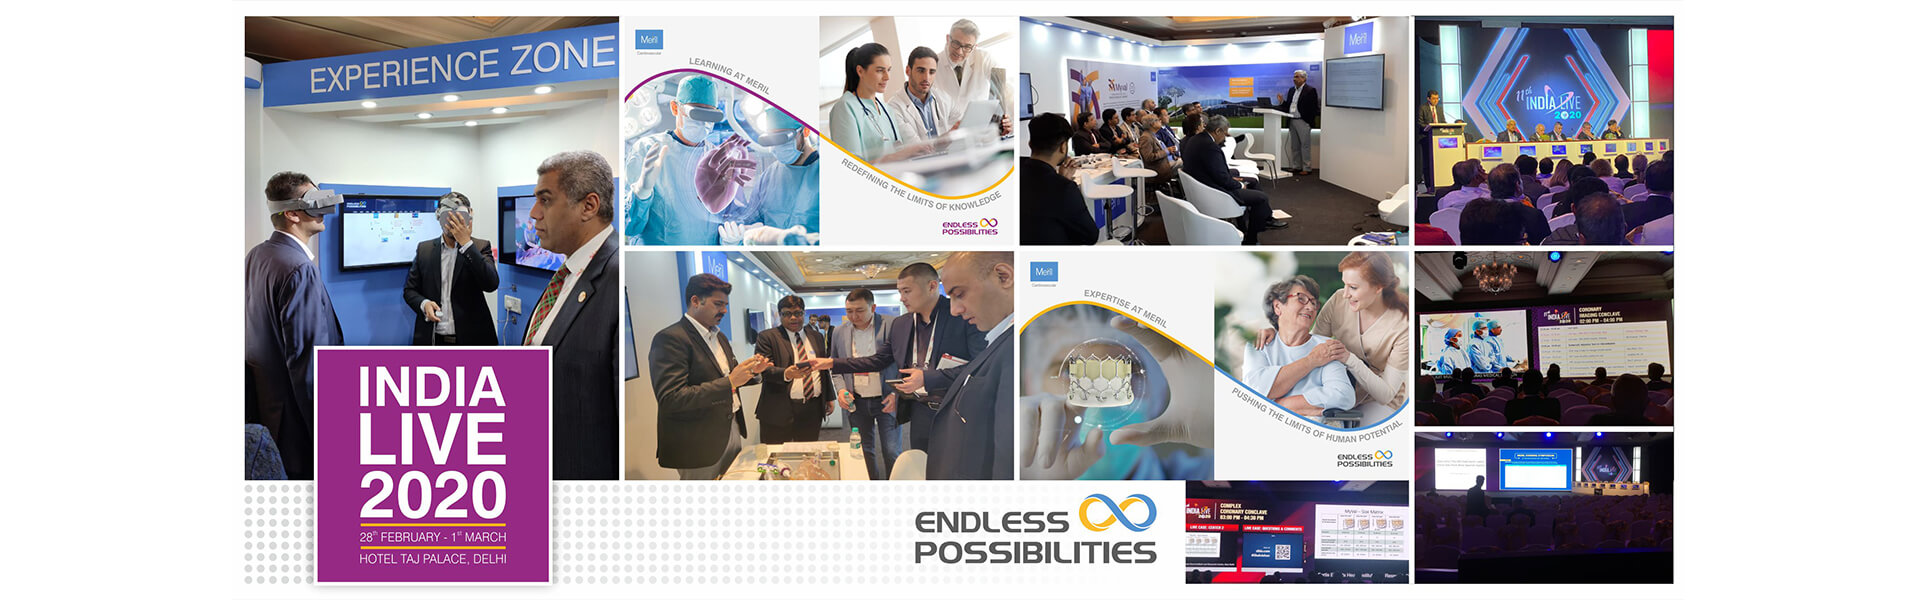 Meril creating Endless Possibilities at India Live 2020